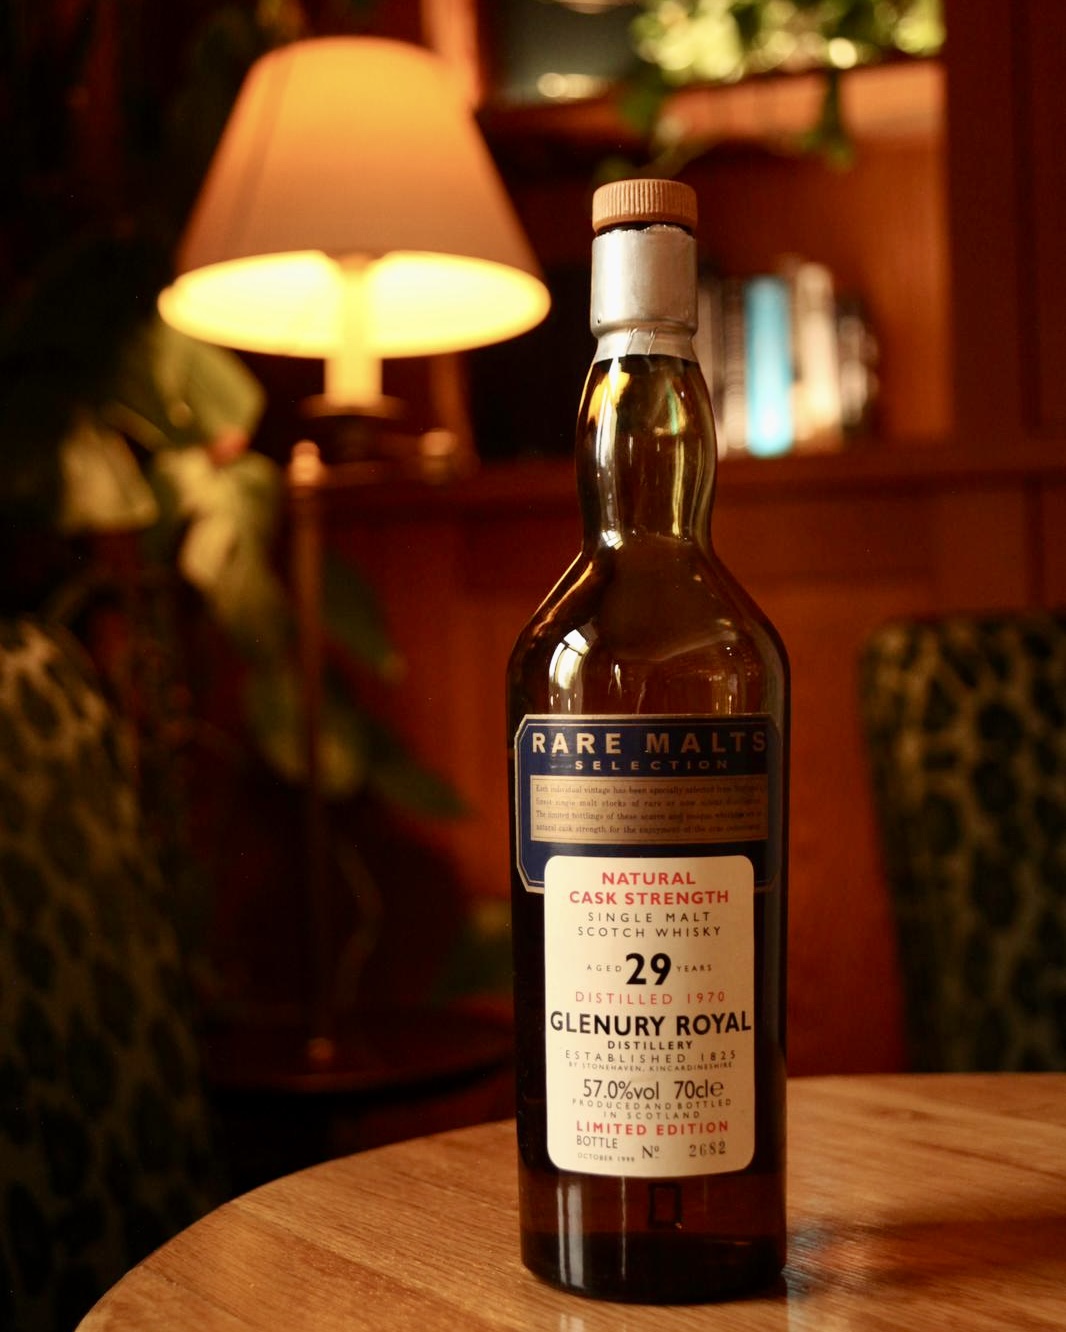 Glenury Royal 29 Year Old 🥃 I’m a whisky nerd and a history nerd, so when both of them join together, nothing makes me happier in the world. We are lucky in the Quaich to have 9 whiskies from the lost distilleries all over Scotland, but one that has a special place in my heart is this Glenury Royal, which is from near my home city of Aberdeen in the seaside town of Stonehaven. Unfortunately, the distillery fell silent in 1983 and was later turned into flats, and some of it was demolished. It is a distillery with such a history, one too big to talk about in this post, but one I will happily share if you have some to pop into the Quaich Bar. The smell of this whisky is like dry smoke, old leather, an ancient library and citrus. There is a light freshness to the taste, followed by vanilla, herbal notes, and dry smoke again. This is a really oily whisky that brings me to a time before I was born. This whisky is just pure joy bottled up! - Calum Diack, Quaich Bar Manager #whiskyoftheweek